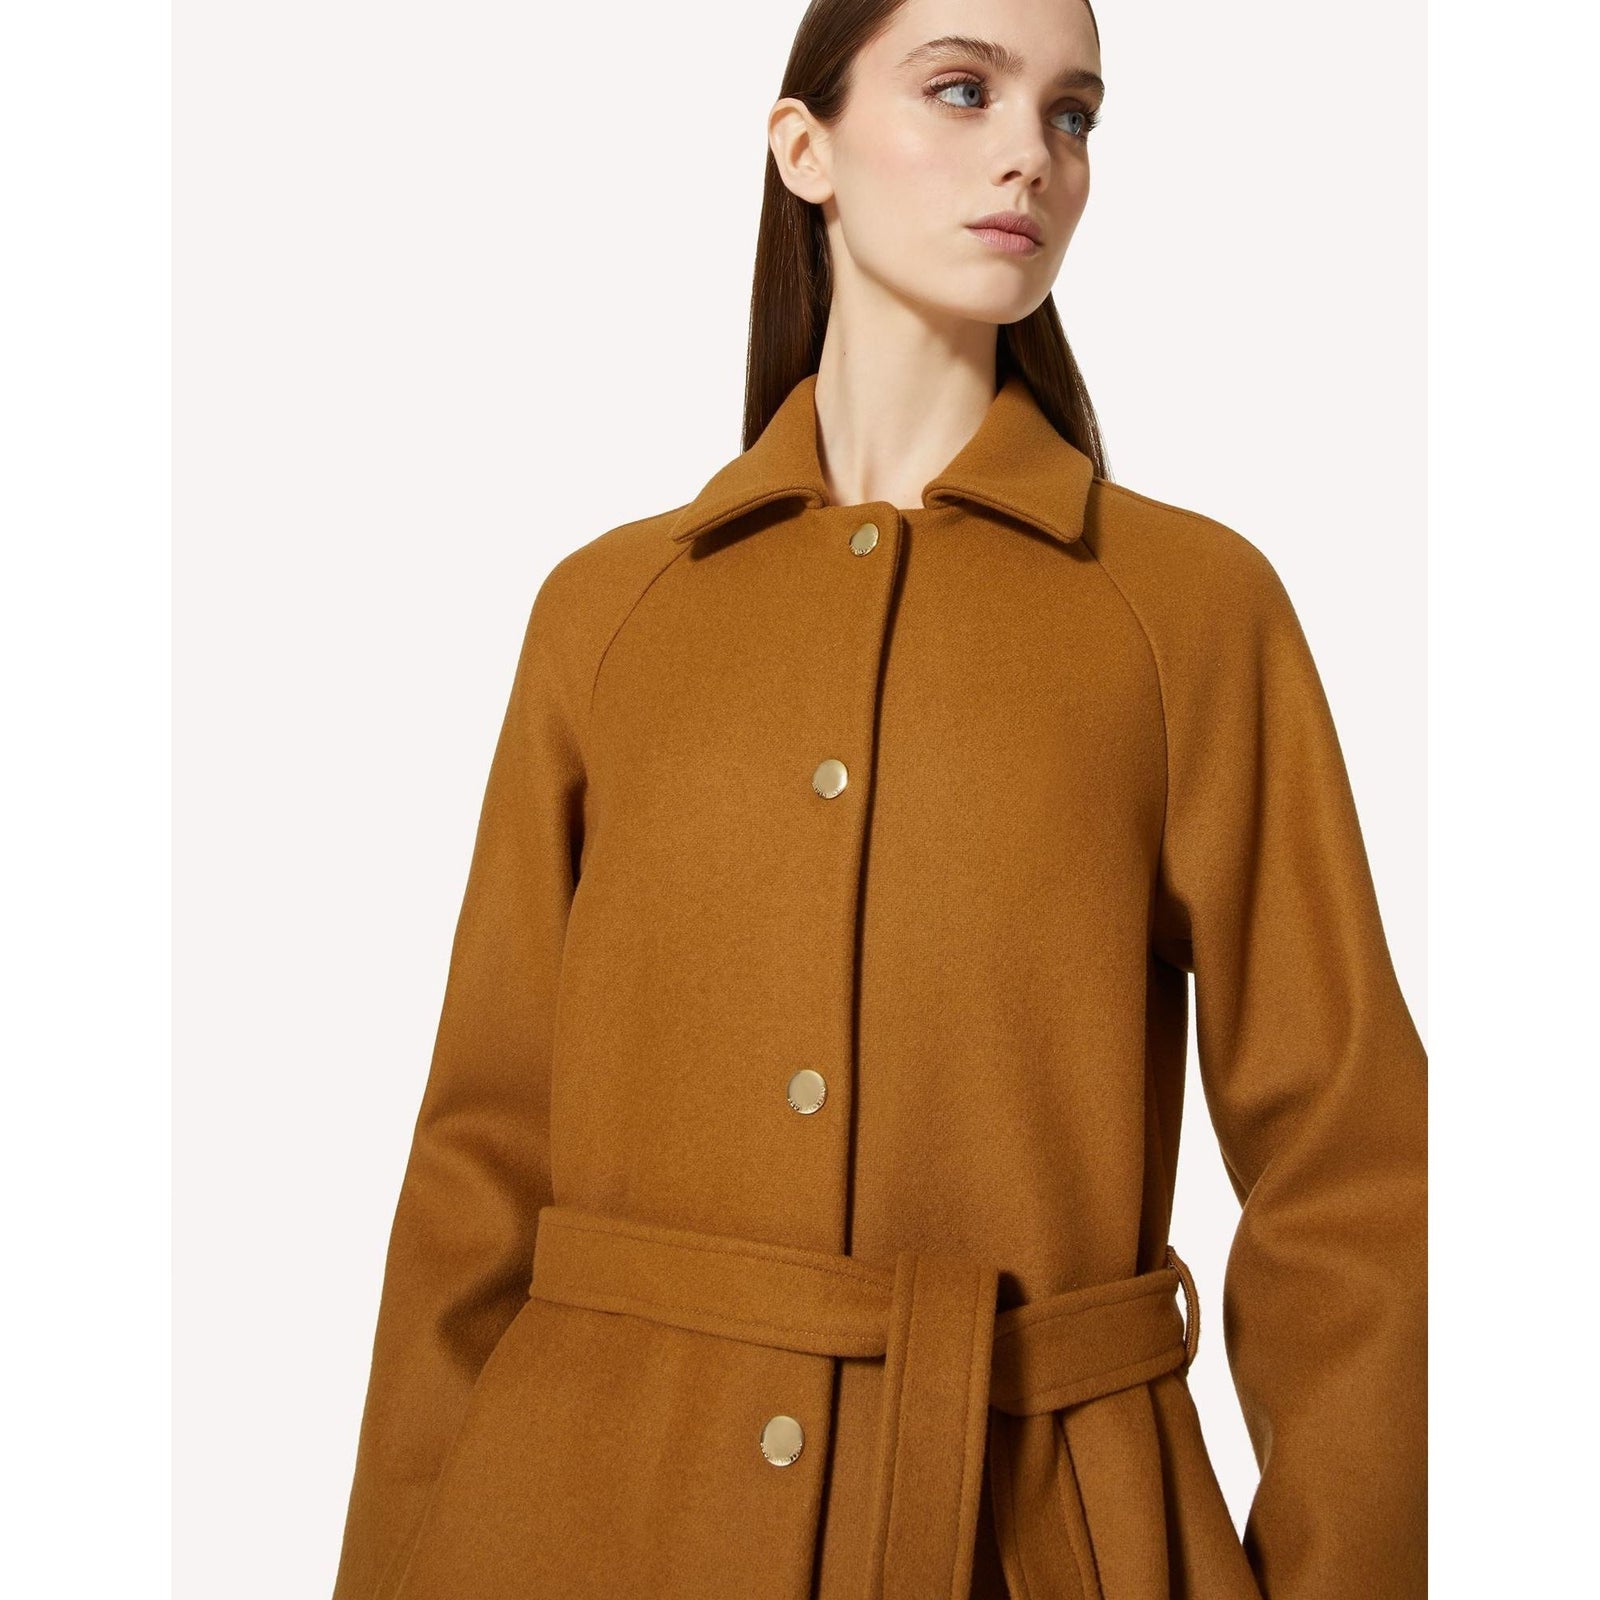 RED VALENTINO CASHMERE WOOL COAT WITH BELT - Yooto